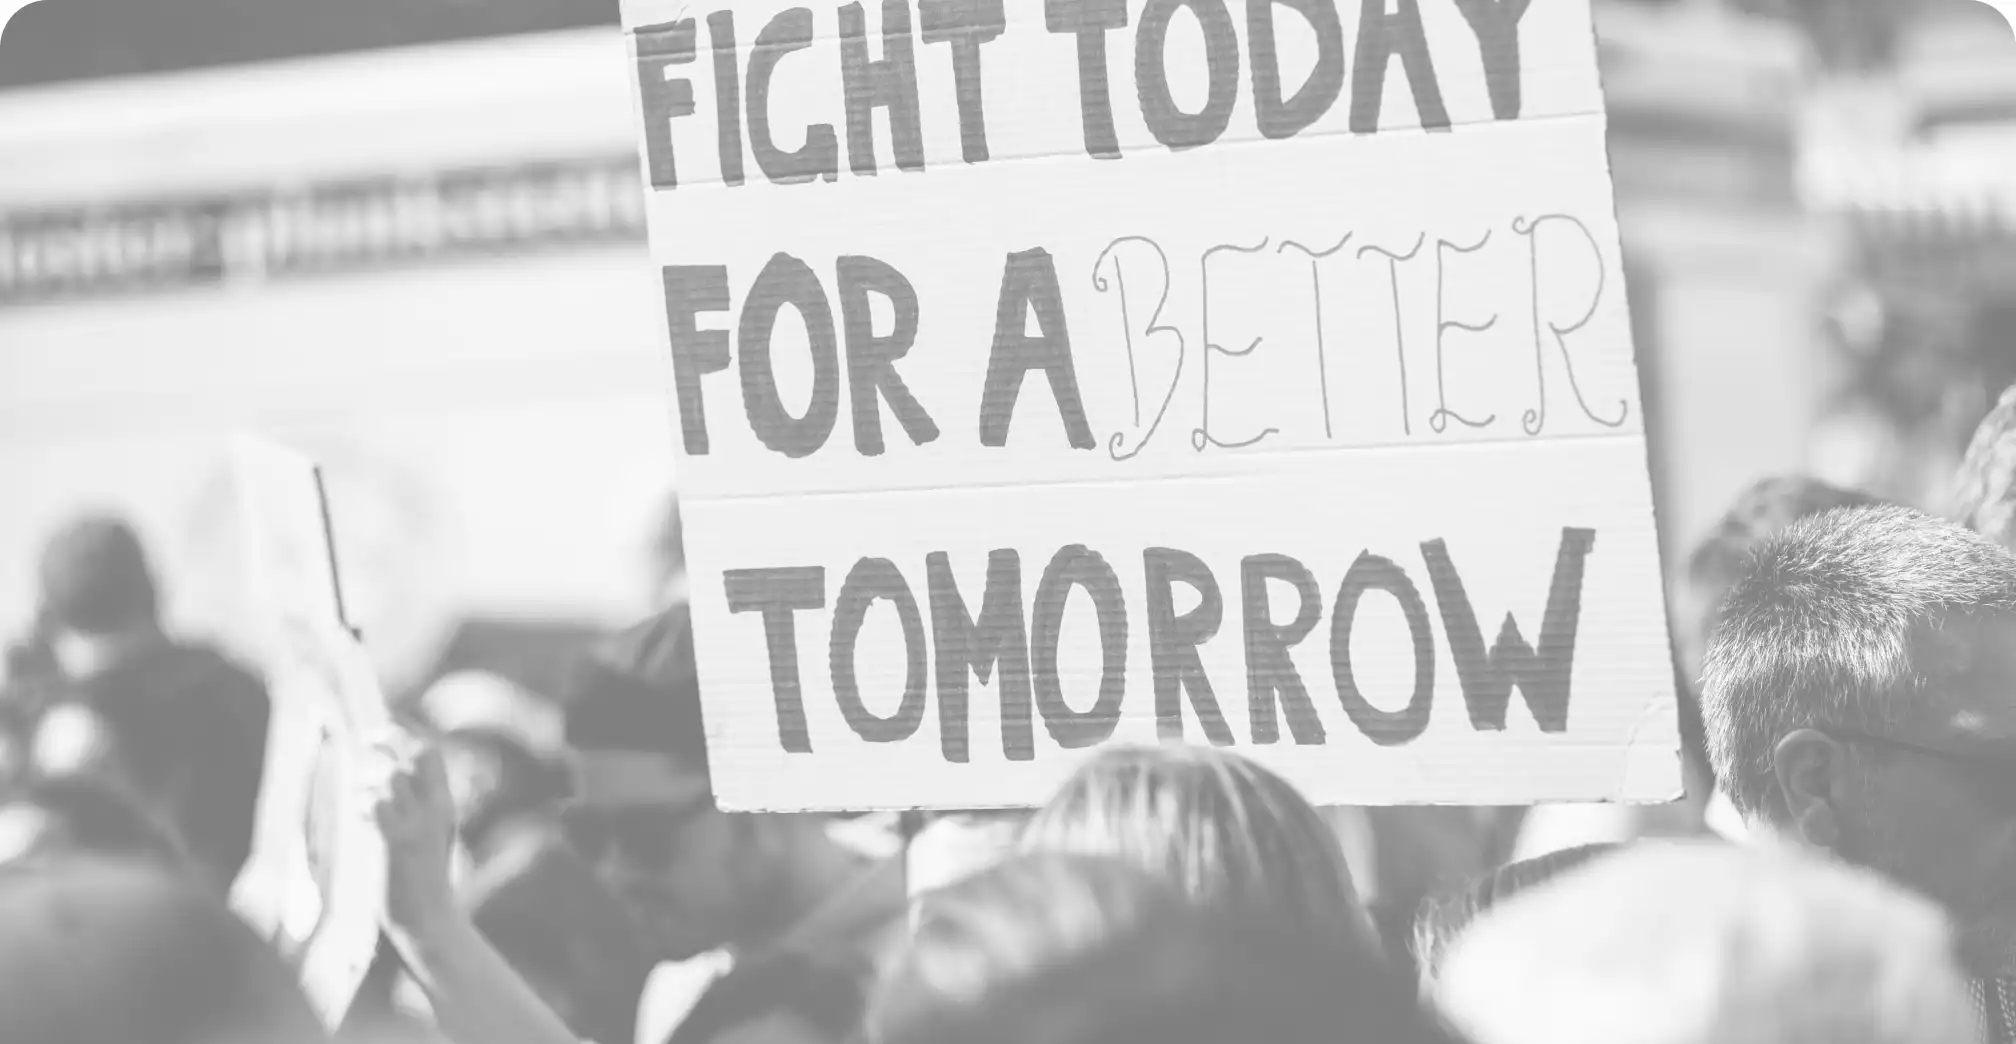 Marcher holding a sign stating "Fight today for a better tomorrow."